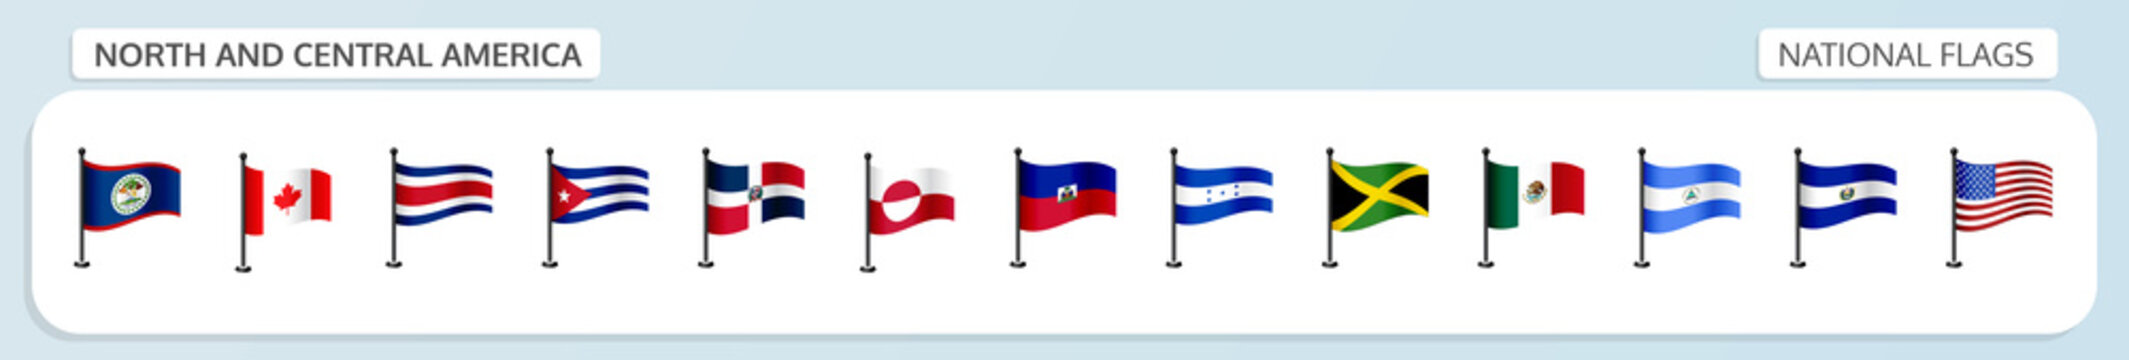 North and central America national flags